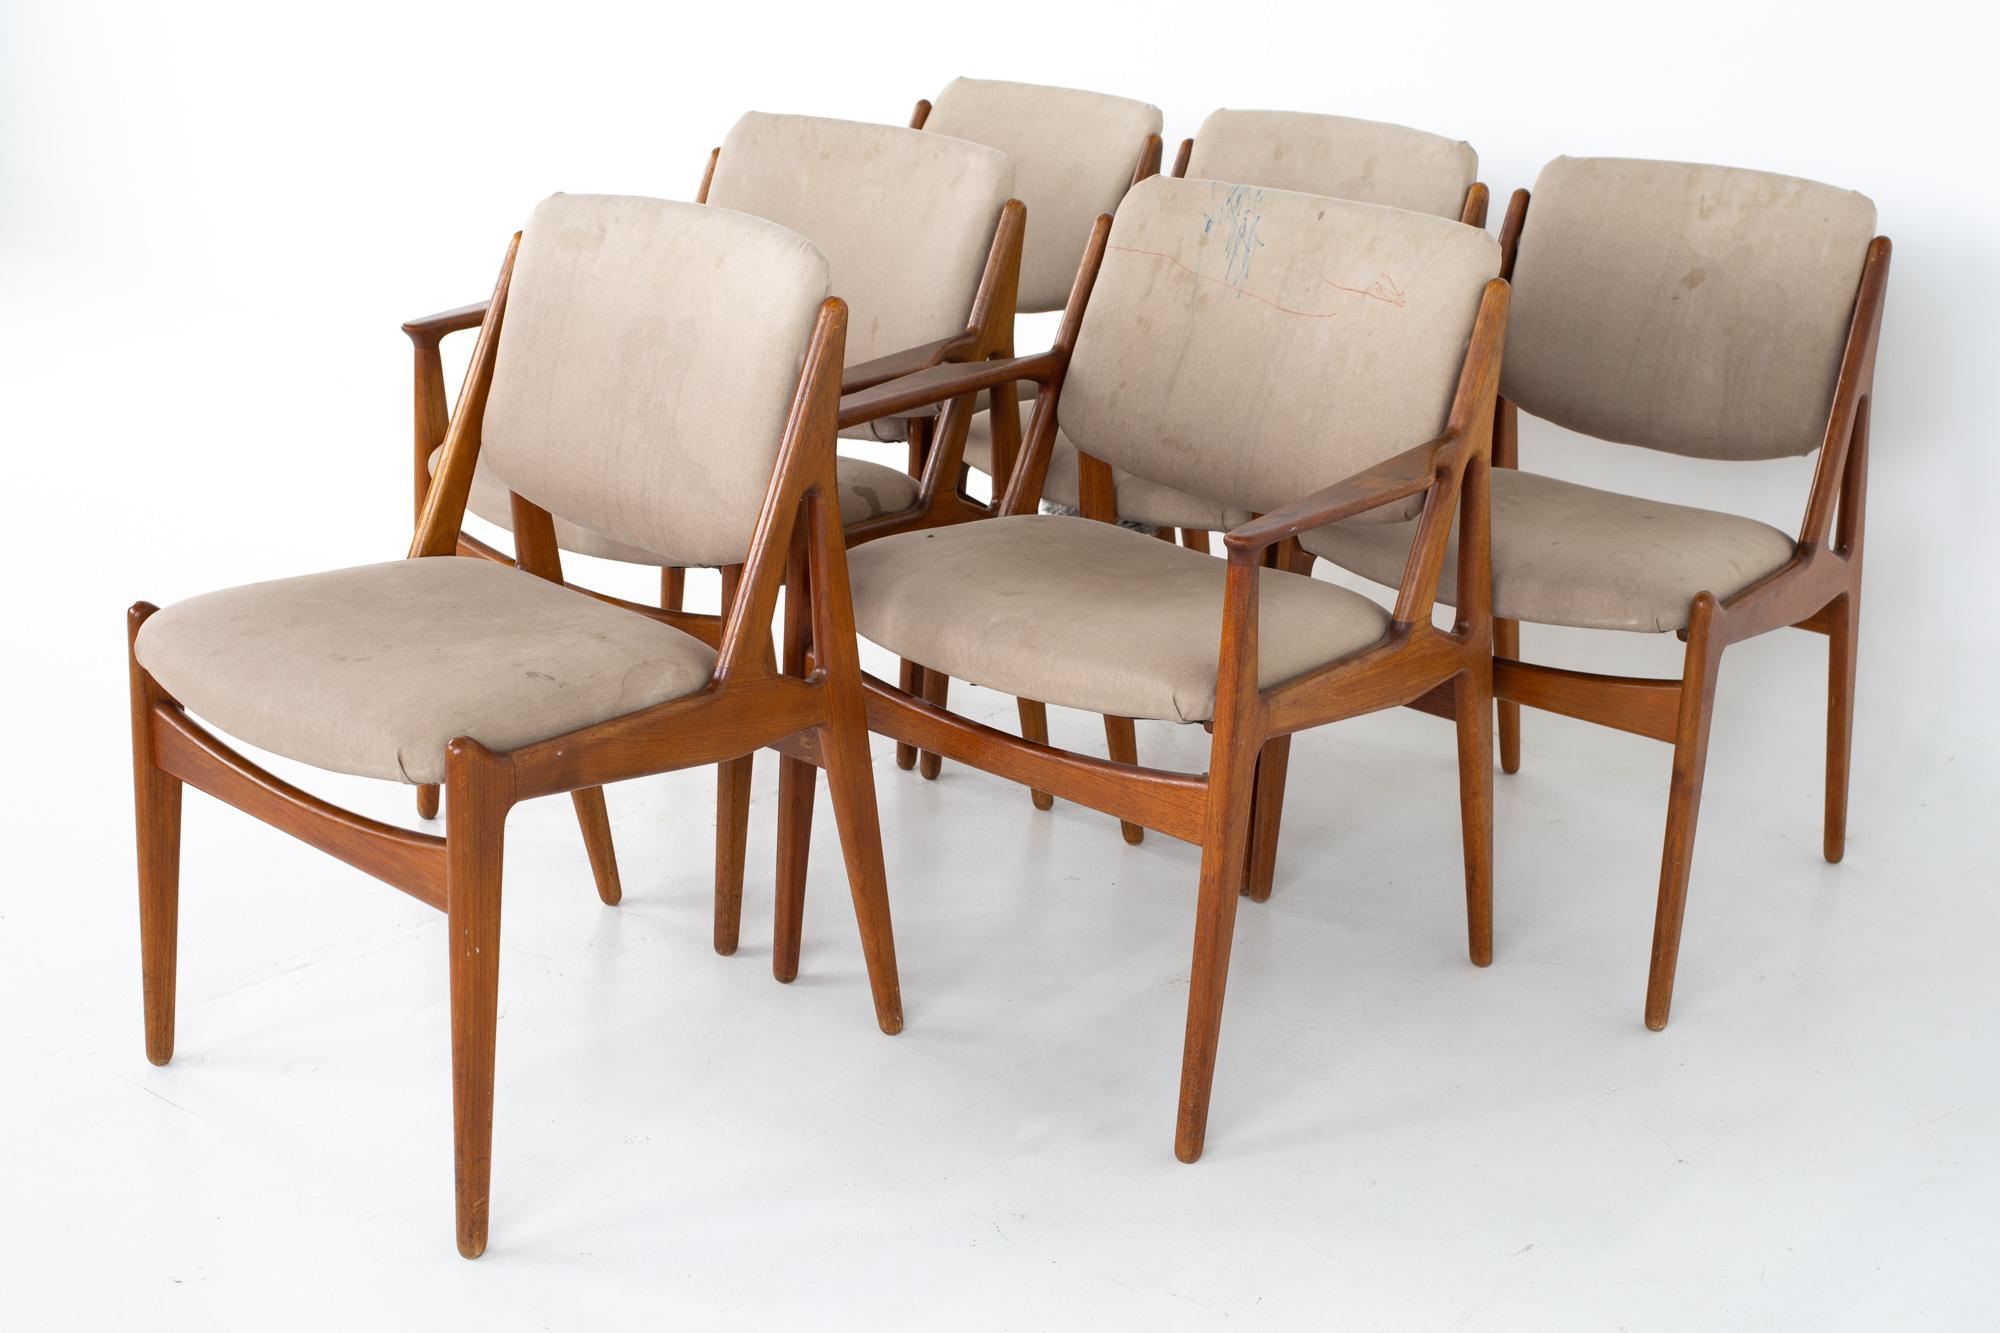 Arne Vodder mid century teak dining chairs - set of 6
Each chair measures: 24 wide x 22 deep x 31 high, with a seat height of 18 inches 

All pieces of furniture can be had in what we call restored vintage condition. That means the piece is